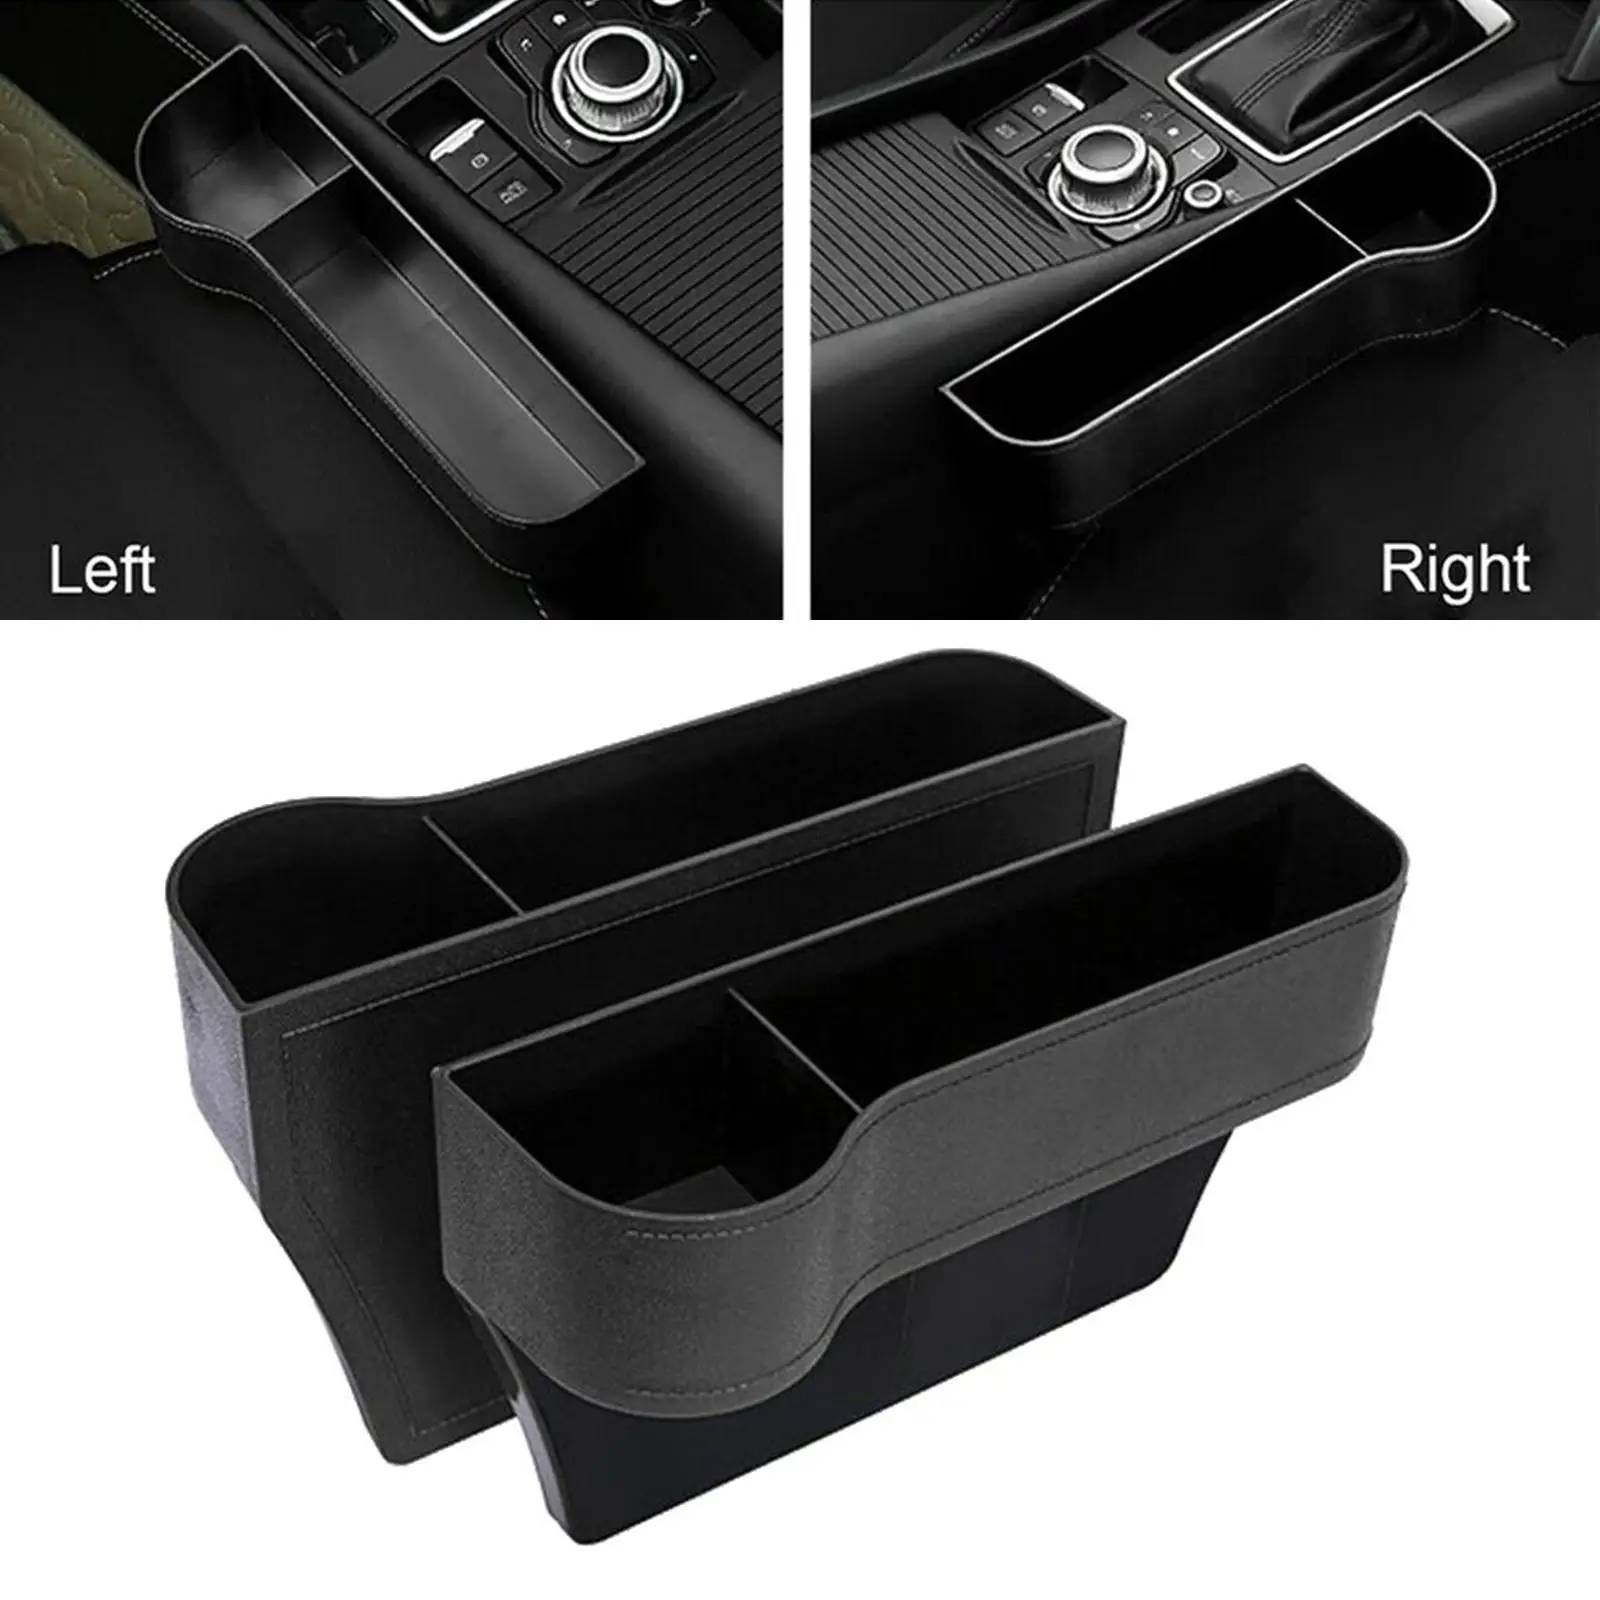  Fillers, 2 Packs  Organizer and cup Holder,  between Seats Organizer for Cellphones, Keys,, Sunglasses